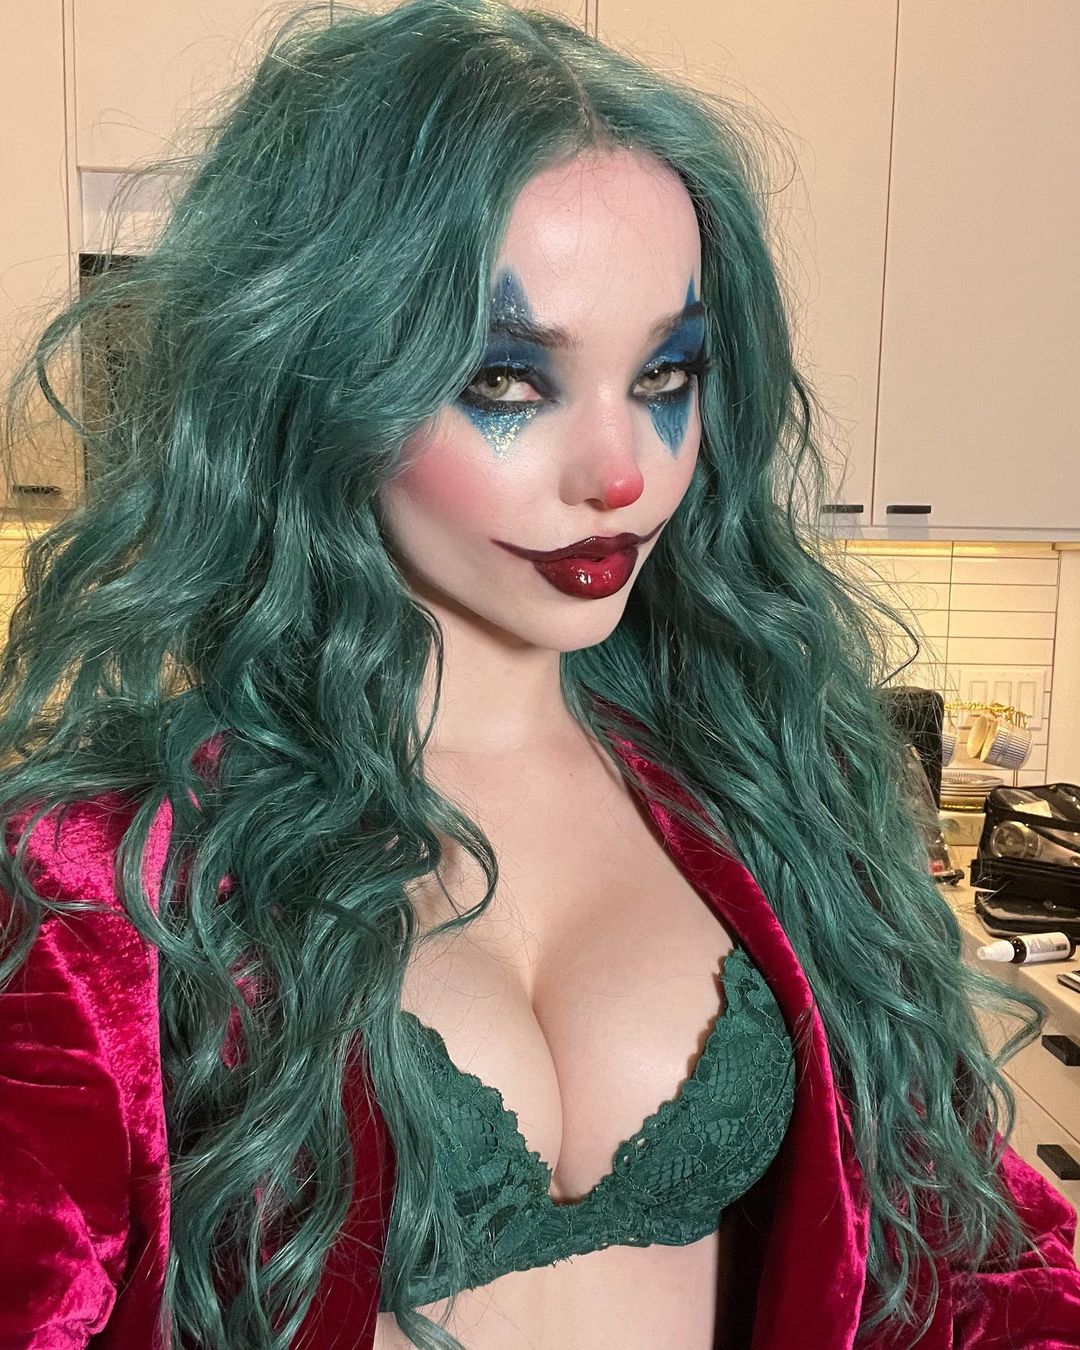 Never jerked to Dove Cameron before but seeing this pic